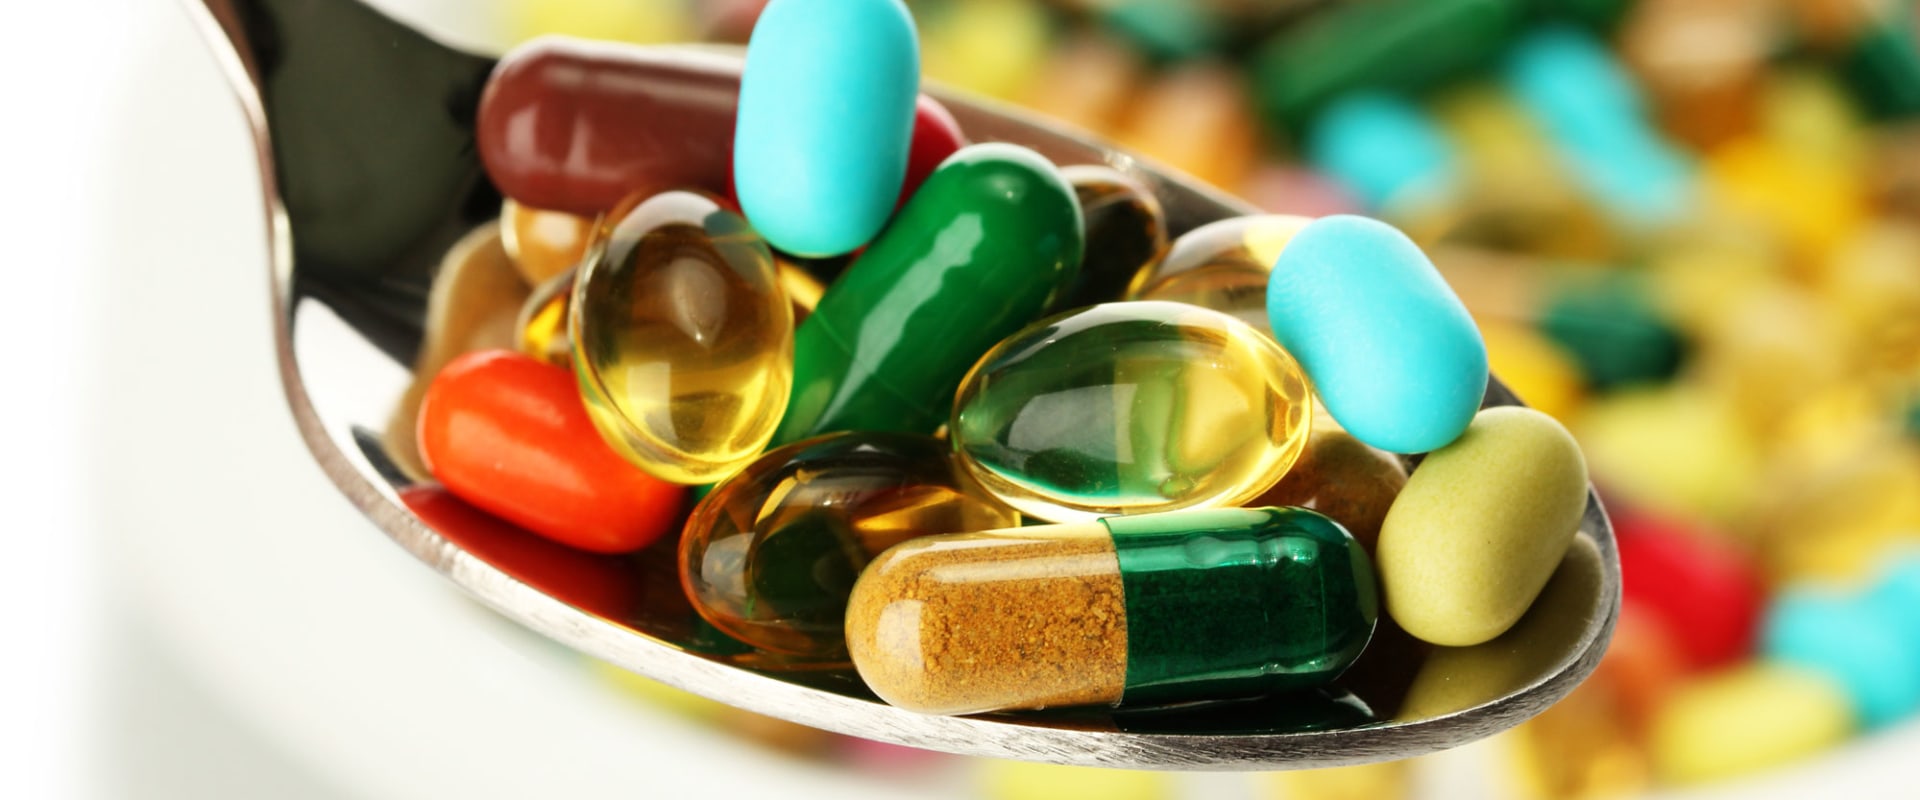 Vitamins and Supplements: What Foods Contain Them?